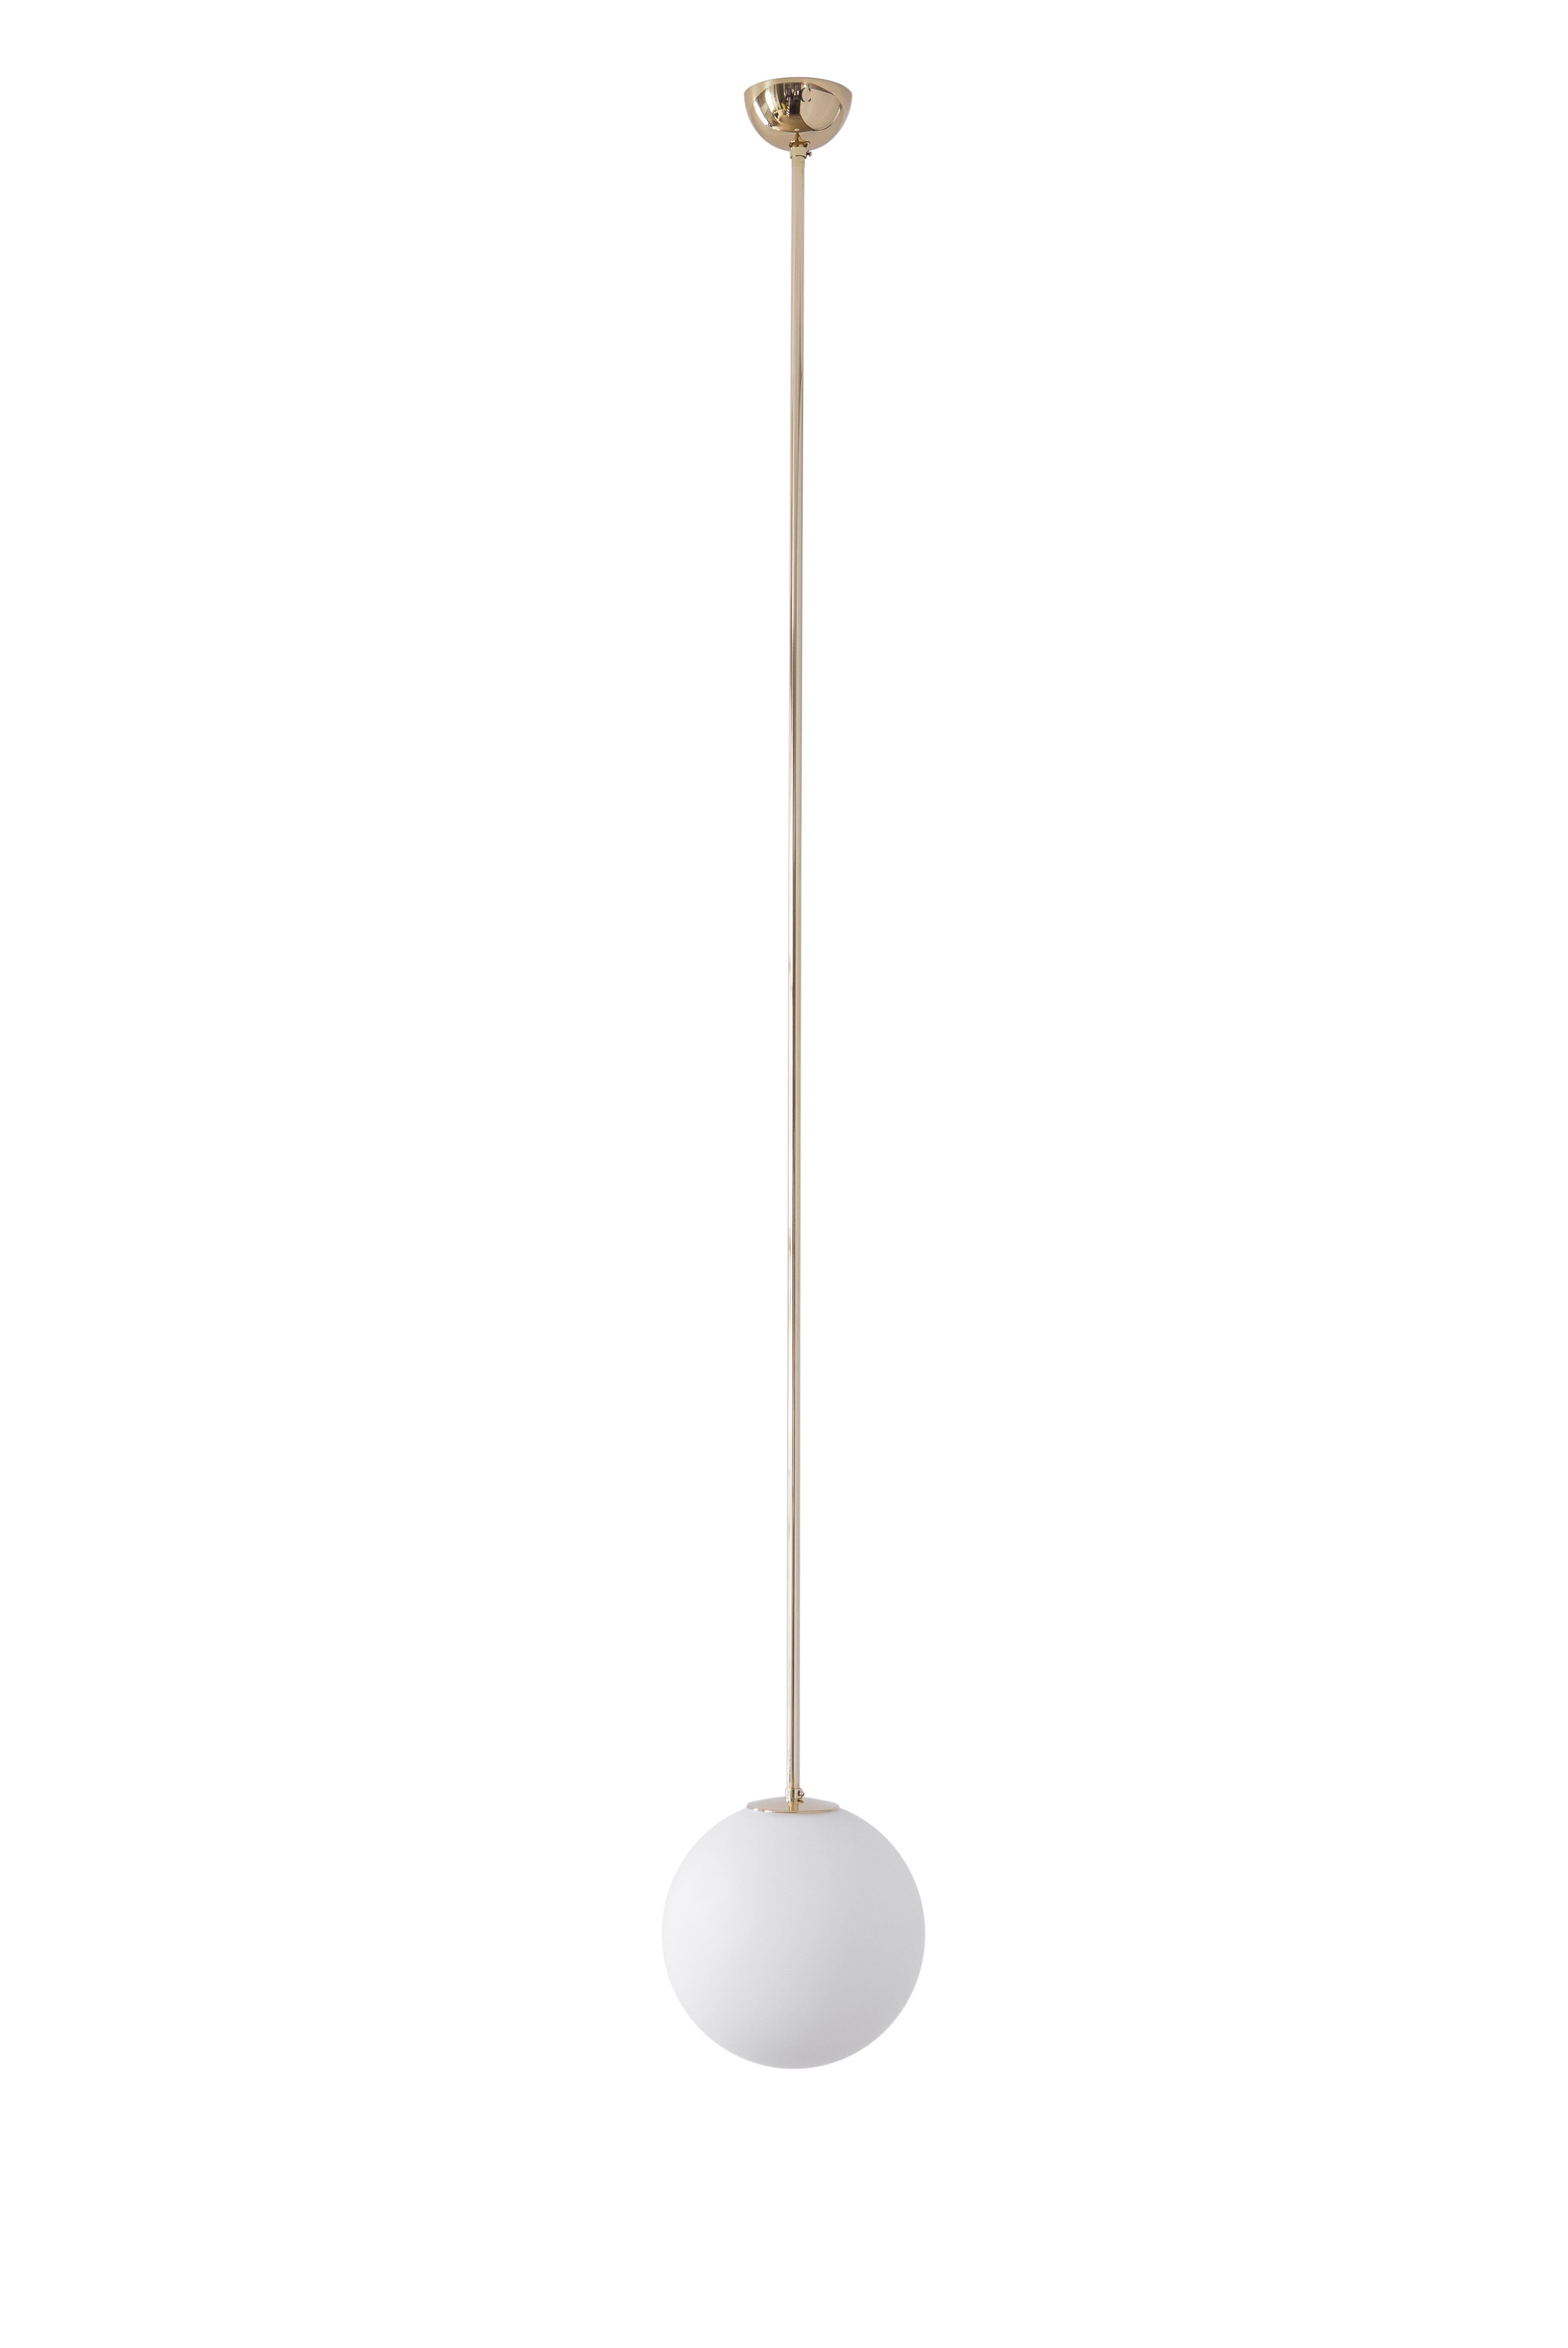 Pair of pendants 06 by Magic Circus Editions.
Dimensions: D 25 x W 25 x H 150 cm, also available in H 90, 110, 130, 175, 190 cm.
Materials: brass, mouth blown glass.

All our lamps can be wired according to each country. If sold to the USA it